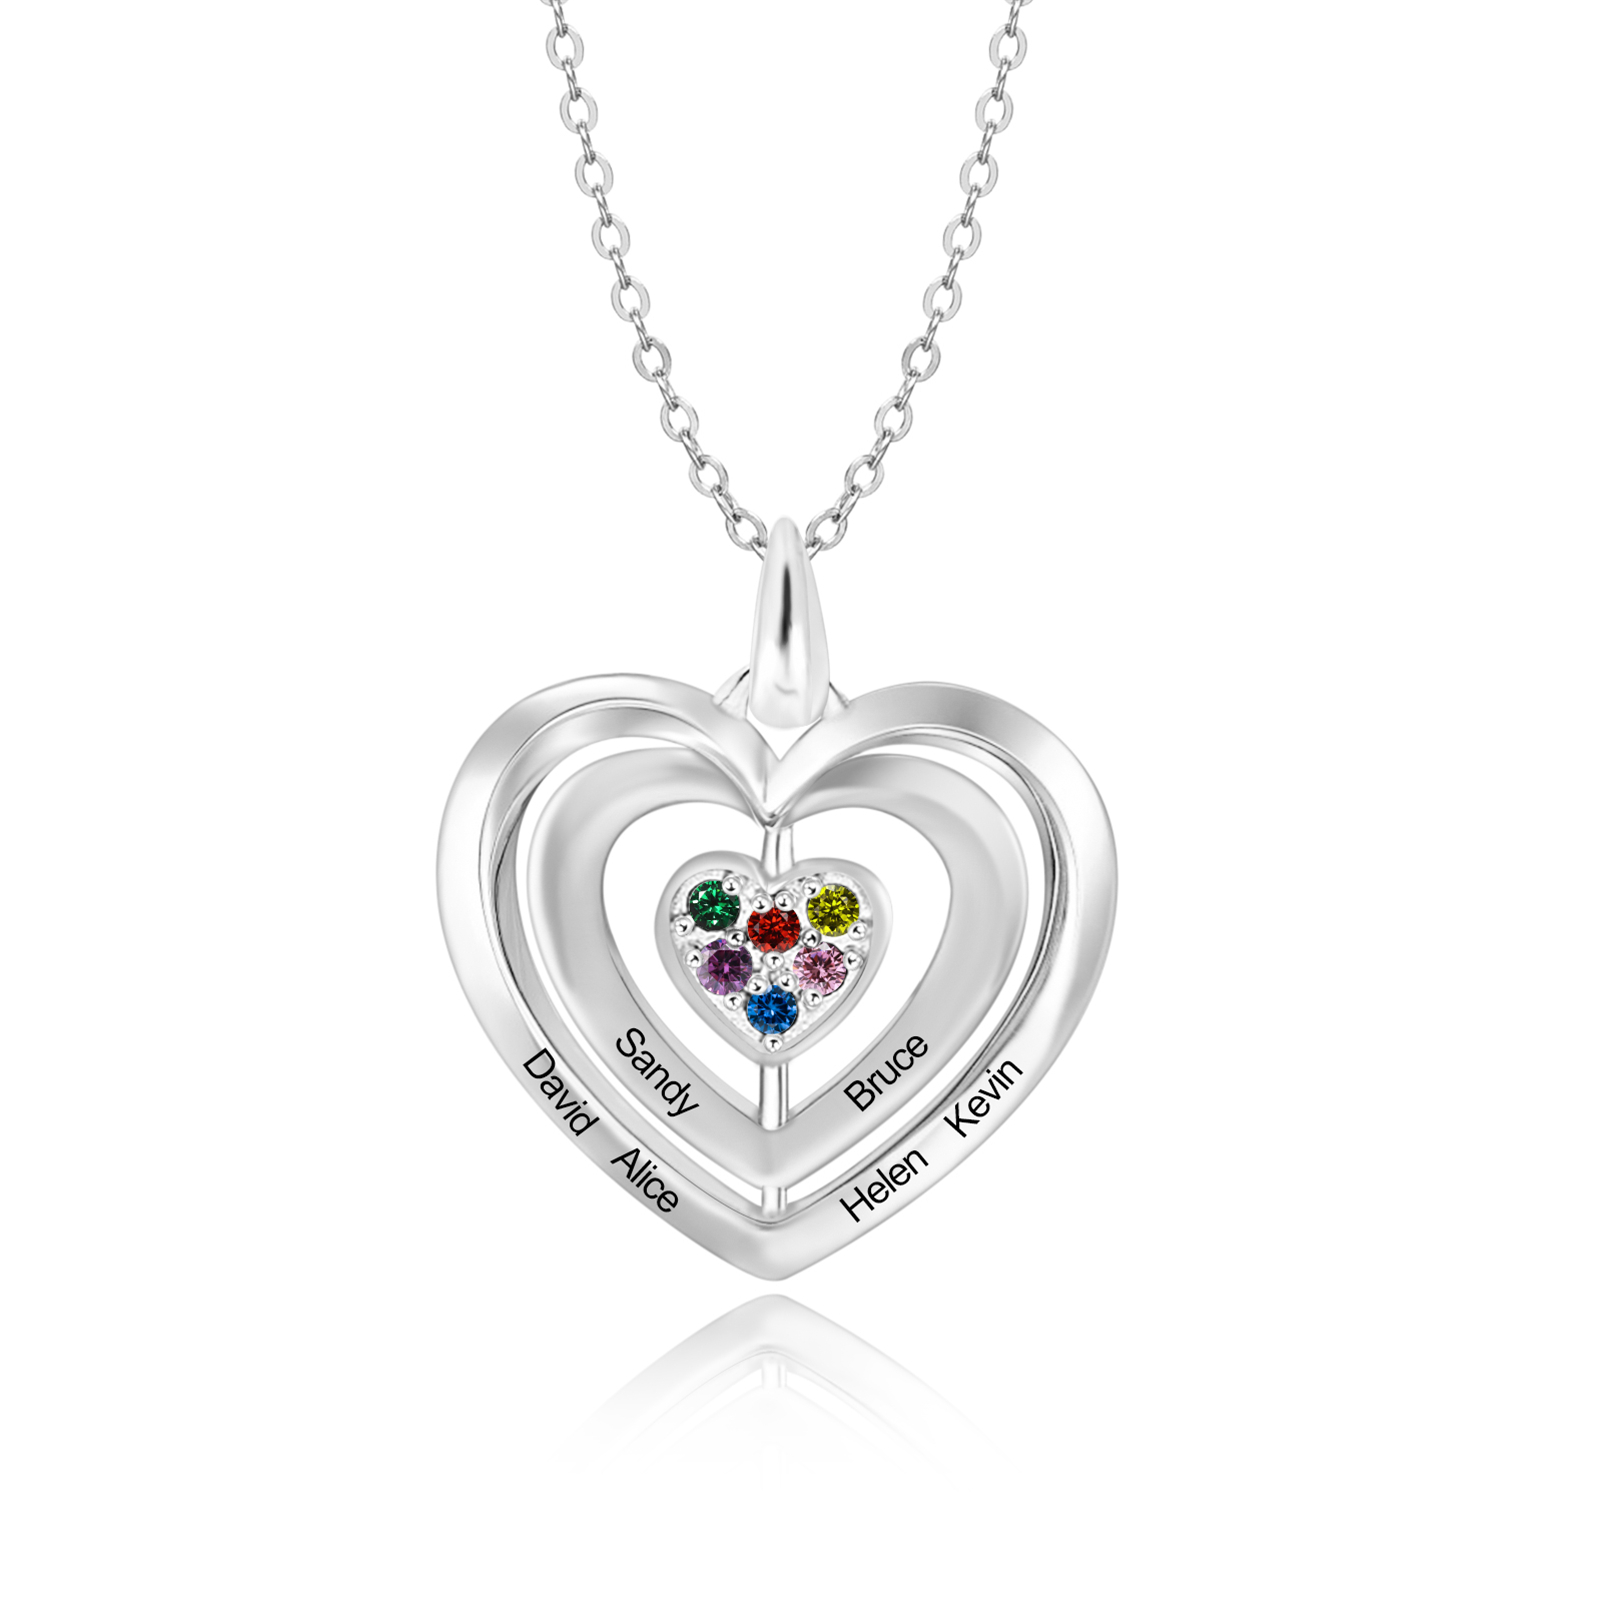 6-6-2 Love Heart Pendant Necklace Name Necklace with Engraving